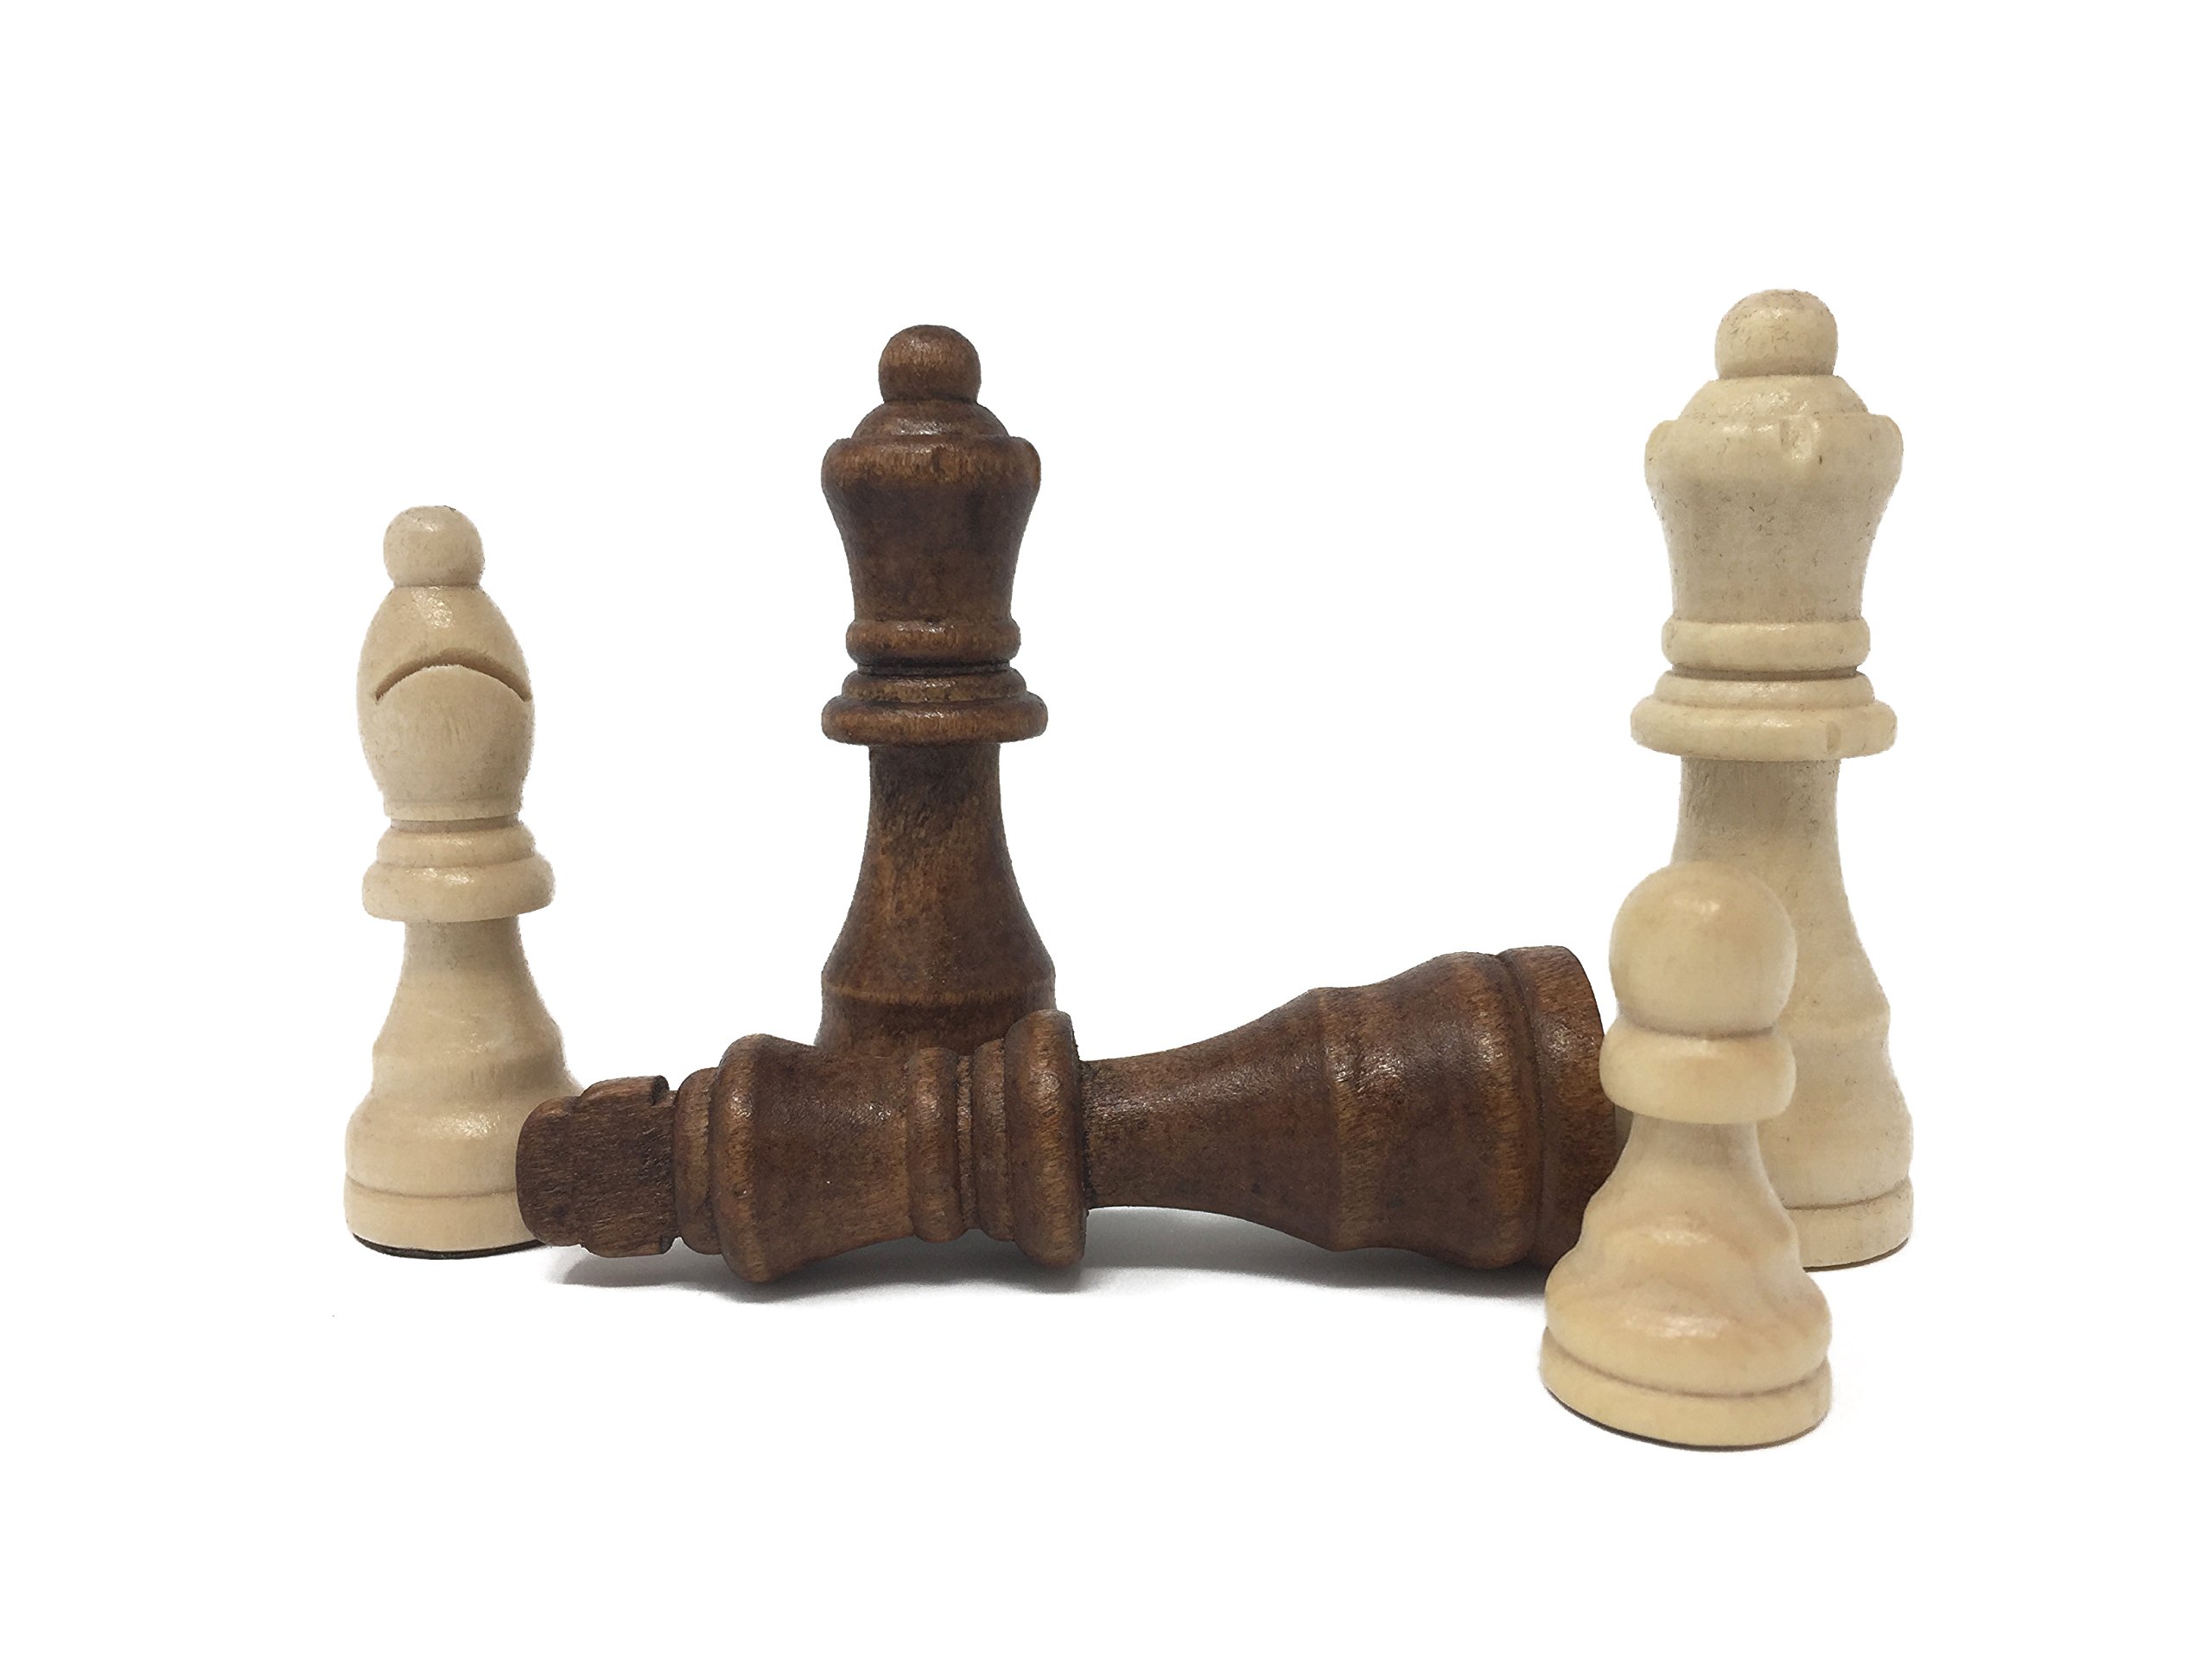 John N. Hansen Games Classic Natural Wood Wooden Chess Set 15” Inlaid Board with Hand Carved Chessmen and Storage, Black, TM-4